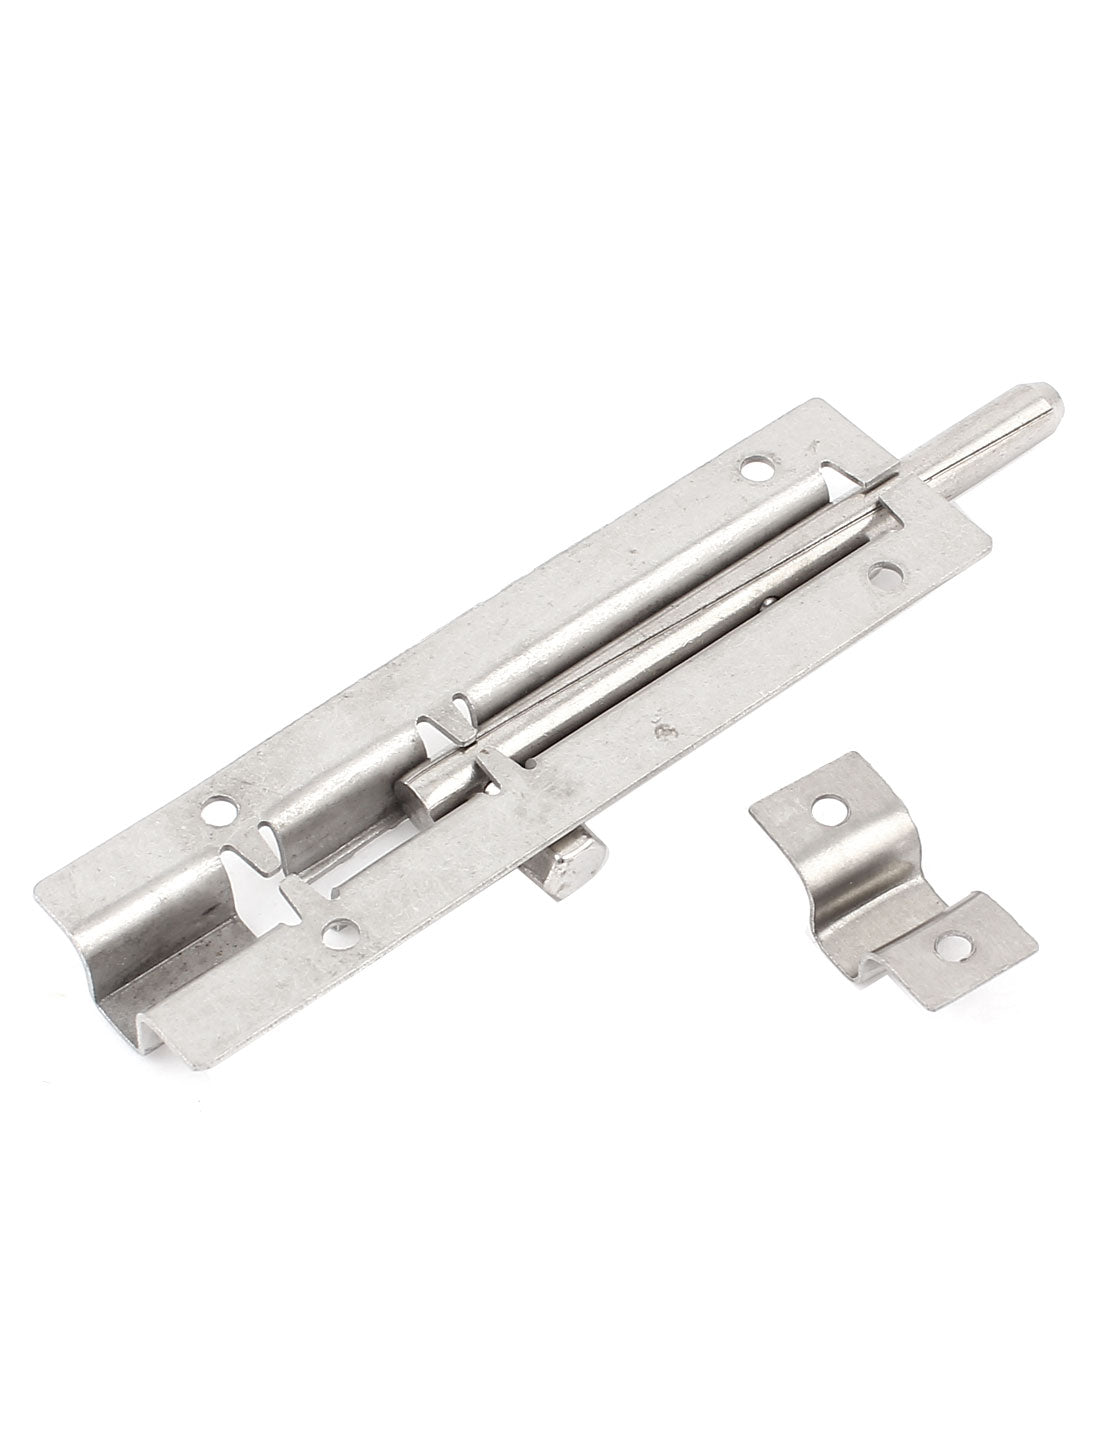 uxcell Uxcell 4" Length Stainless Steel Door Gates Security Latch Sliding Lock Barrel Bolt 100mm Length